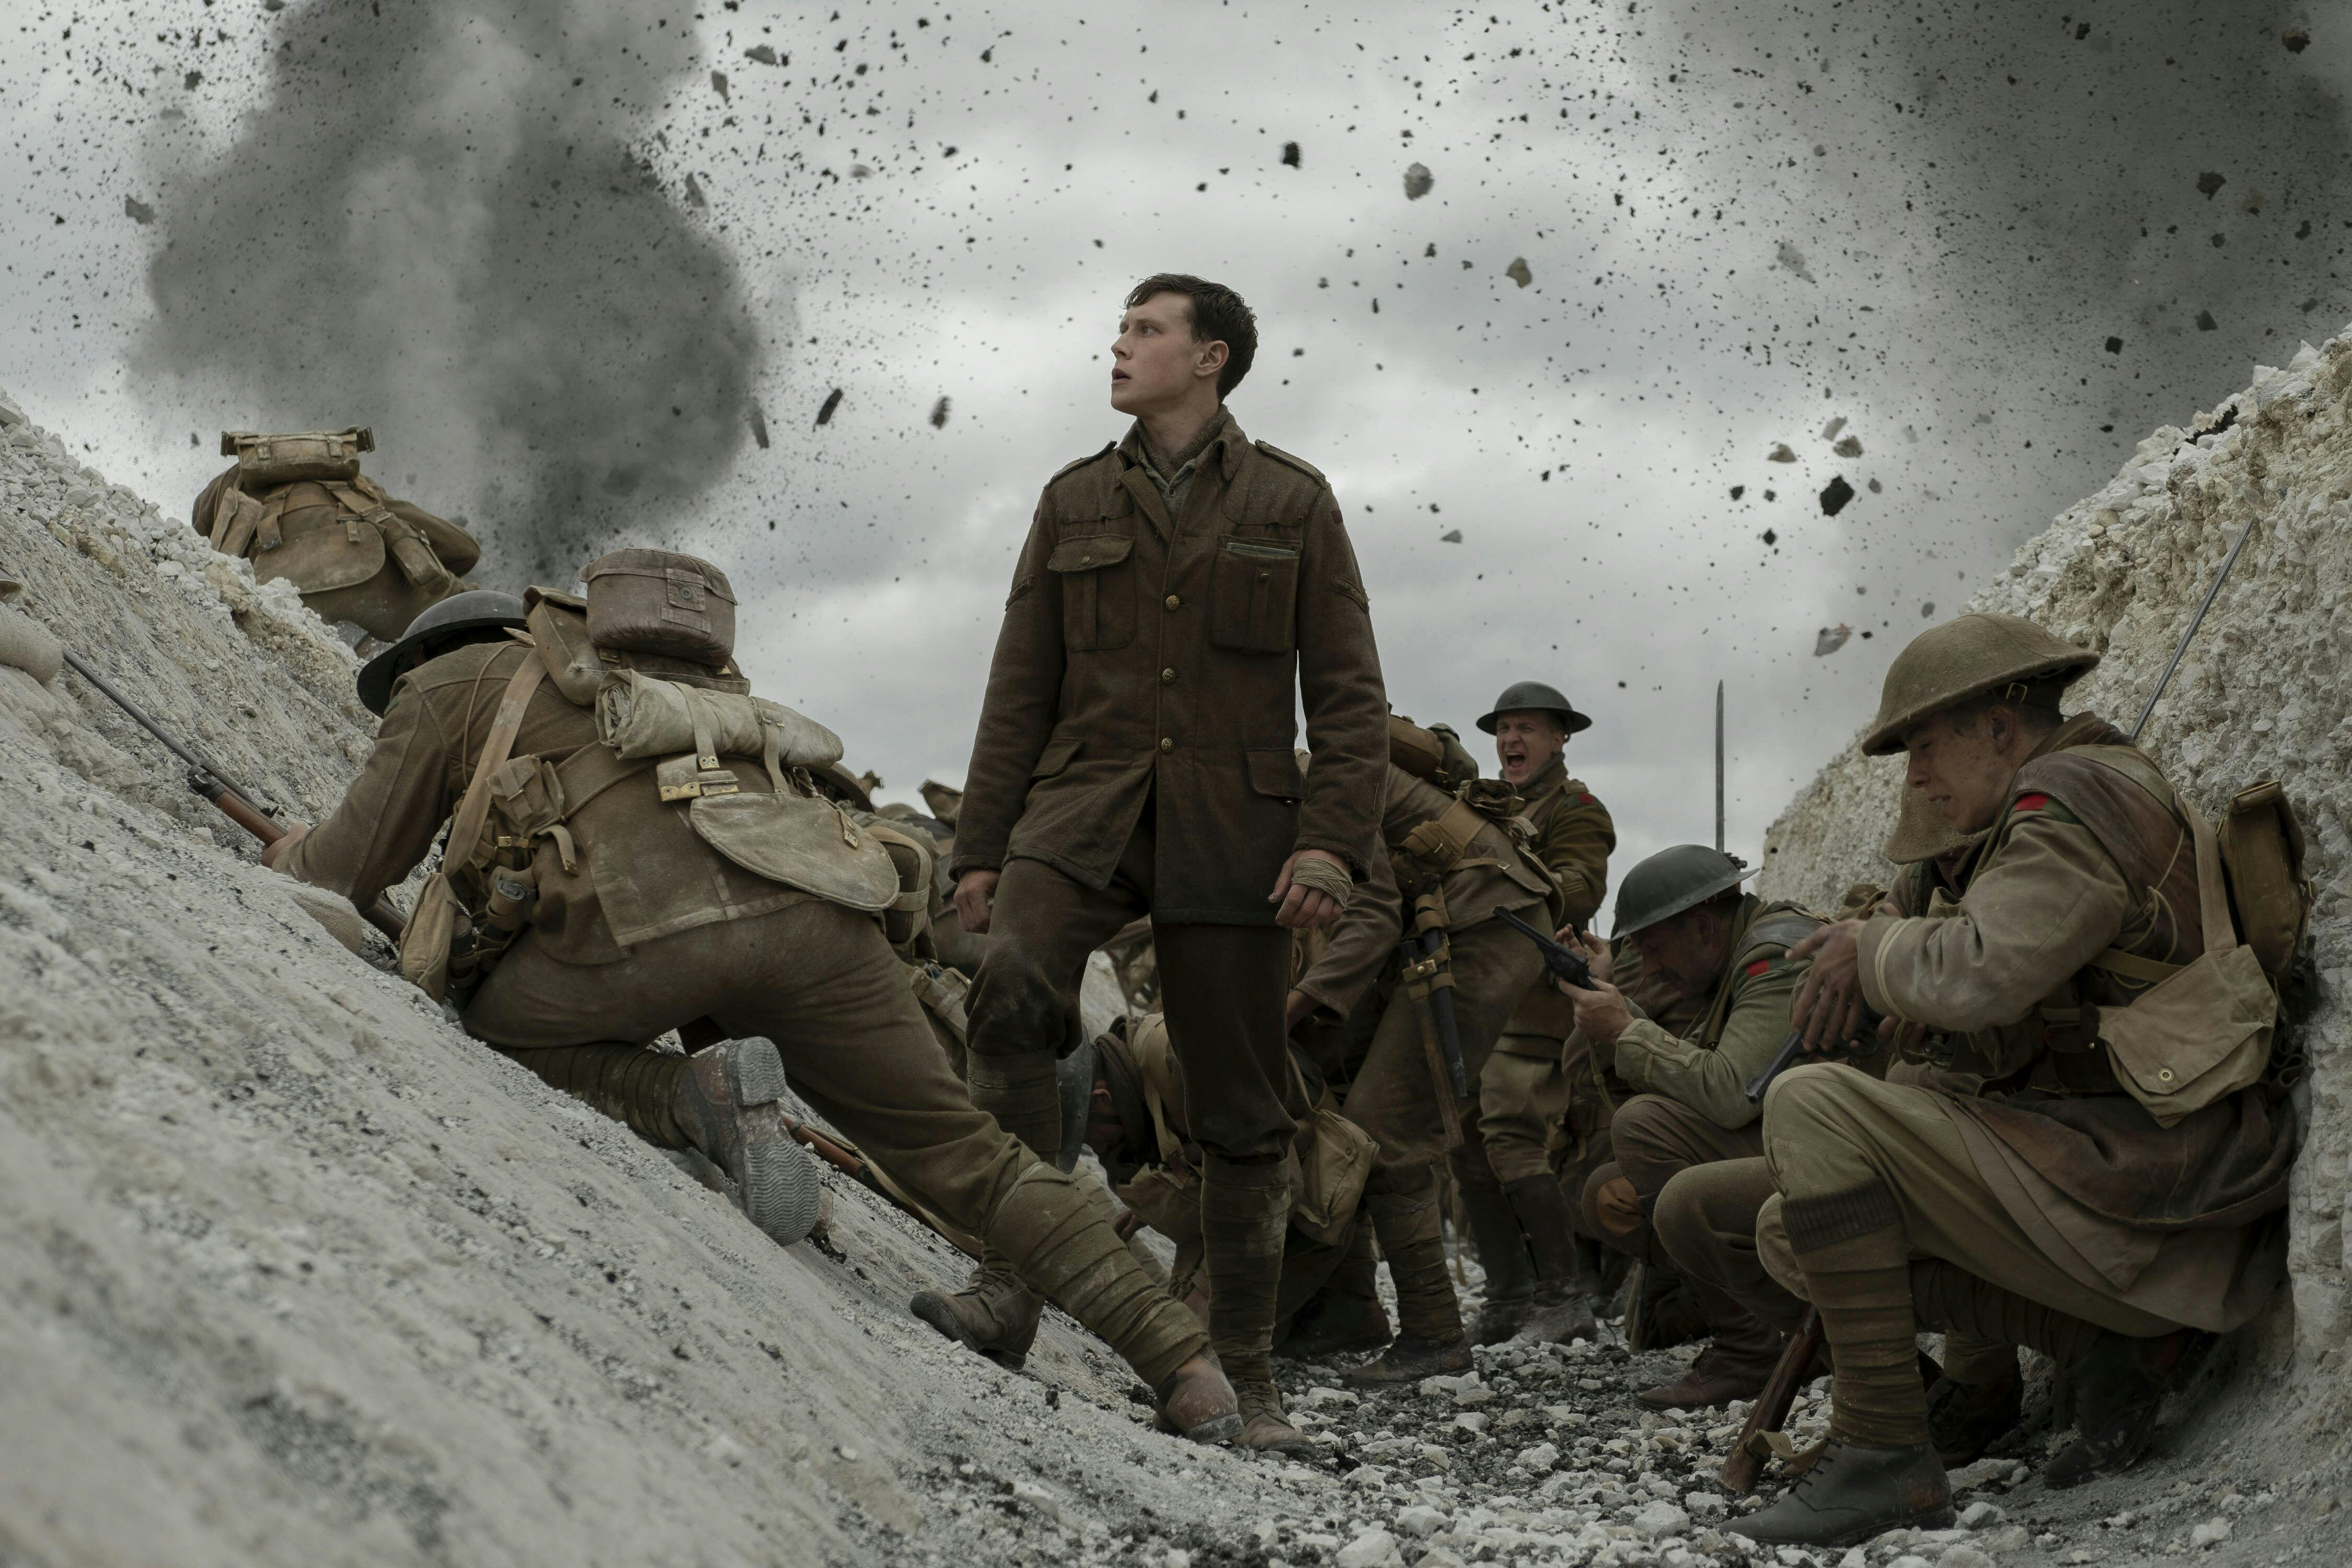 A still from the movie '1917': actor George MacKay stands in the trenches with other troops as they're being shelled.